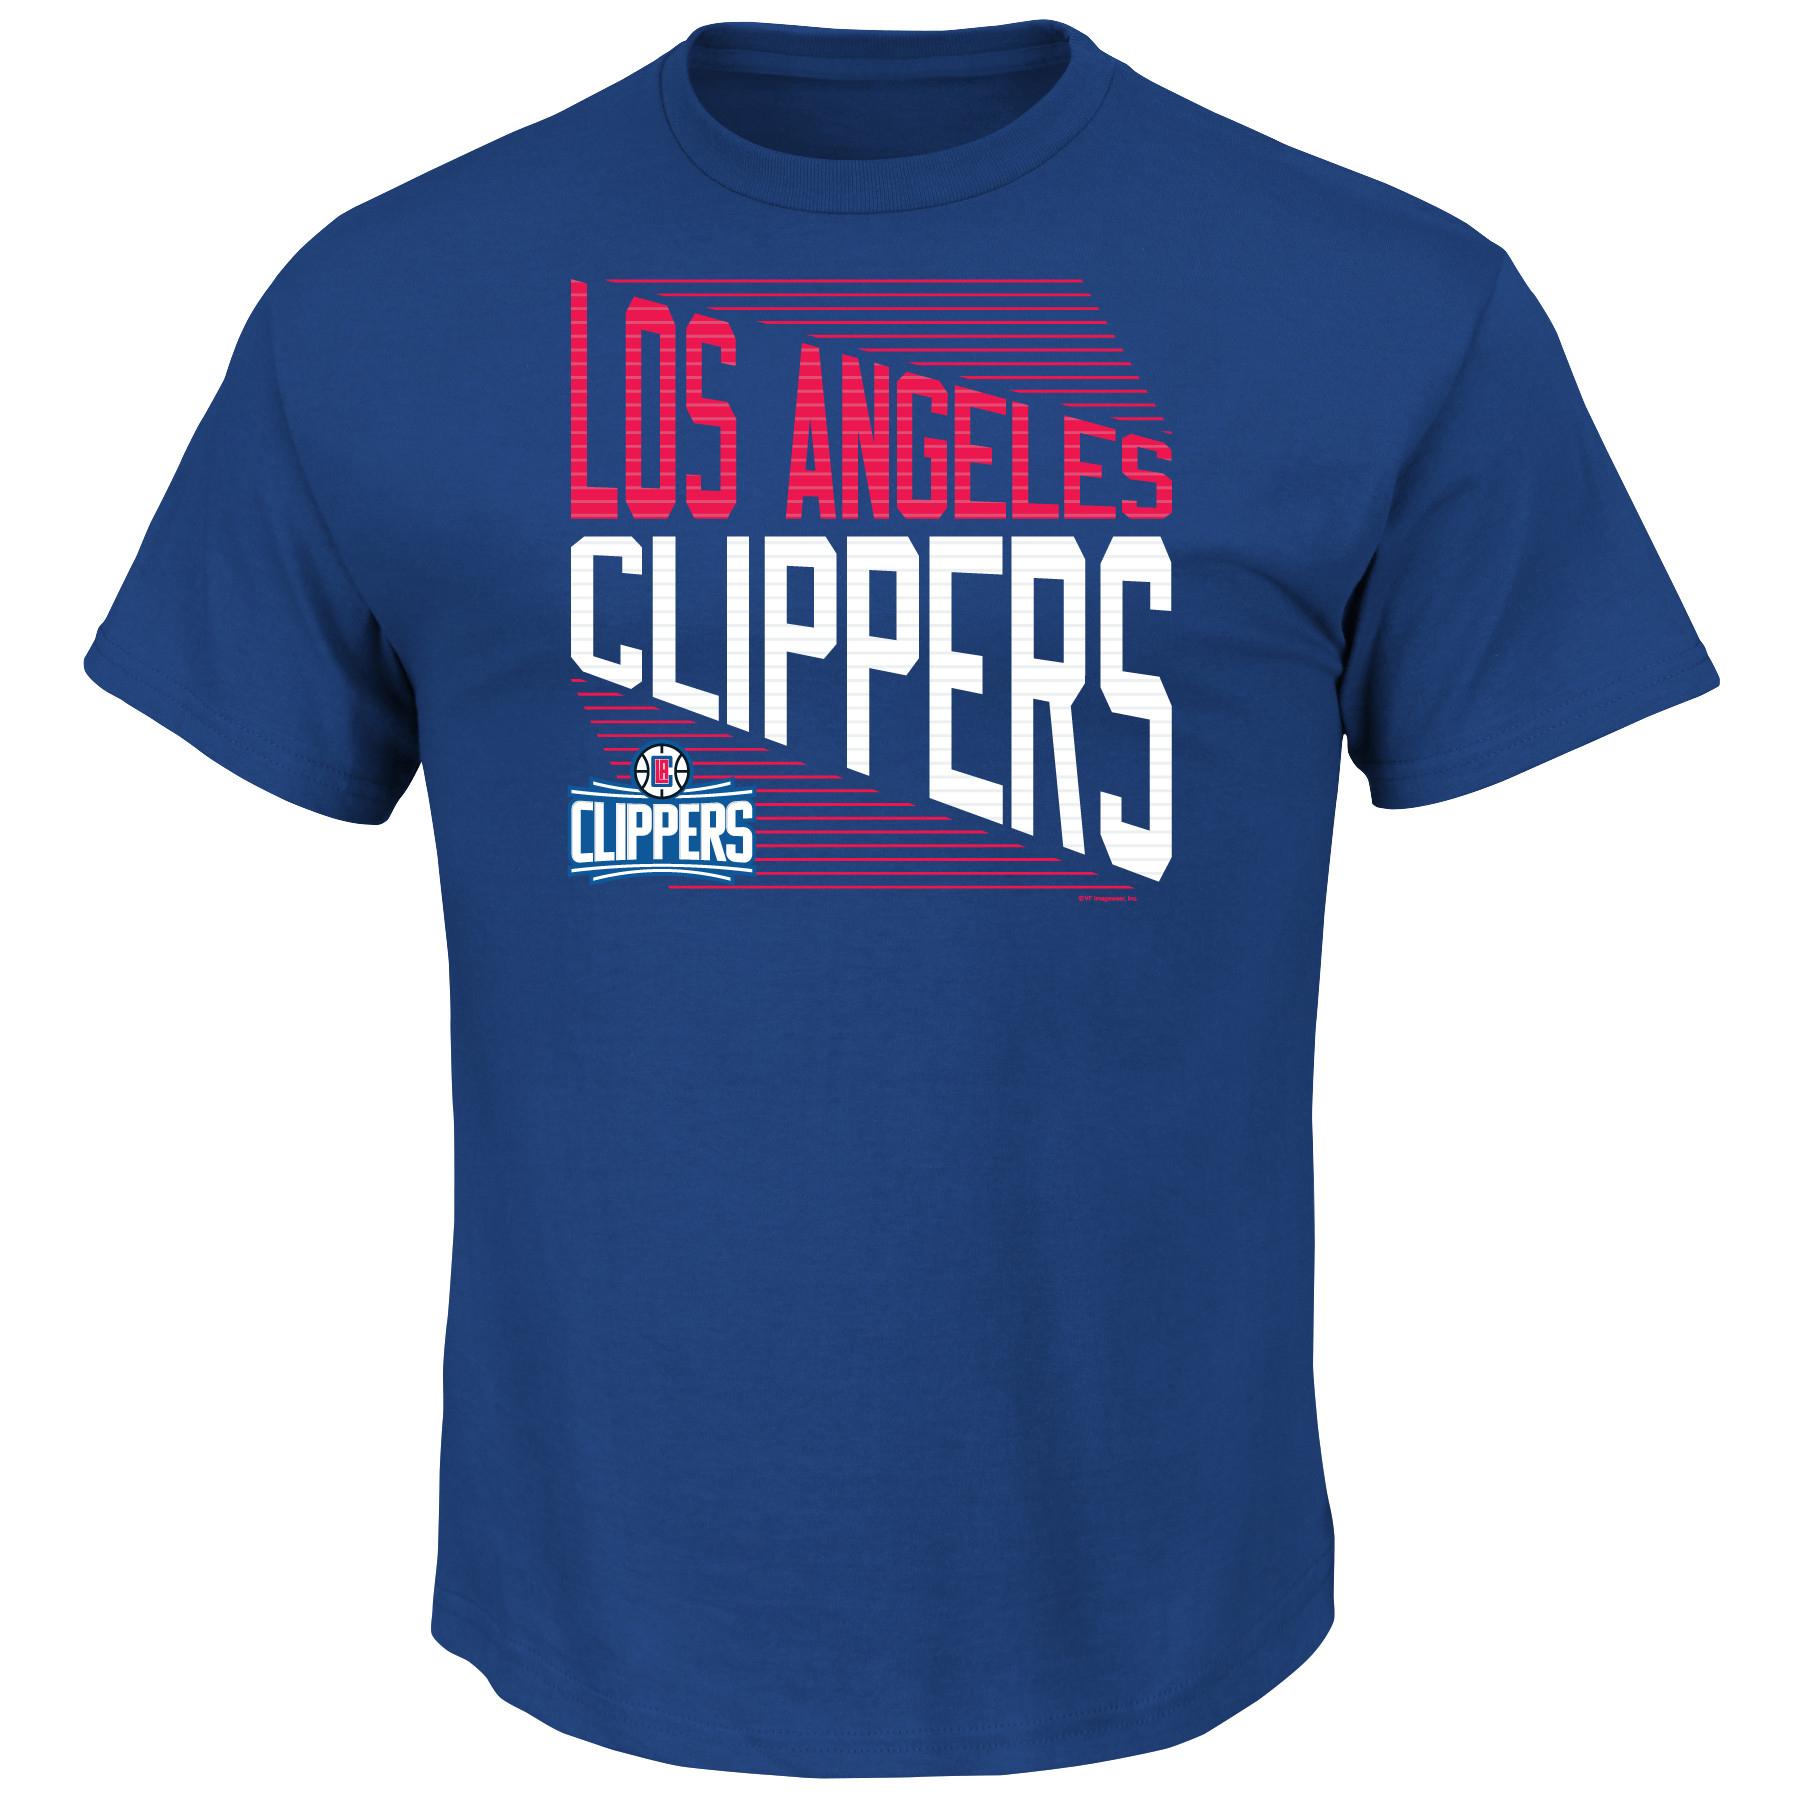 NBA(CANONICAL) Men's T-Shirt - Los Angeles Clippers